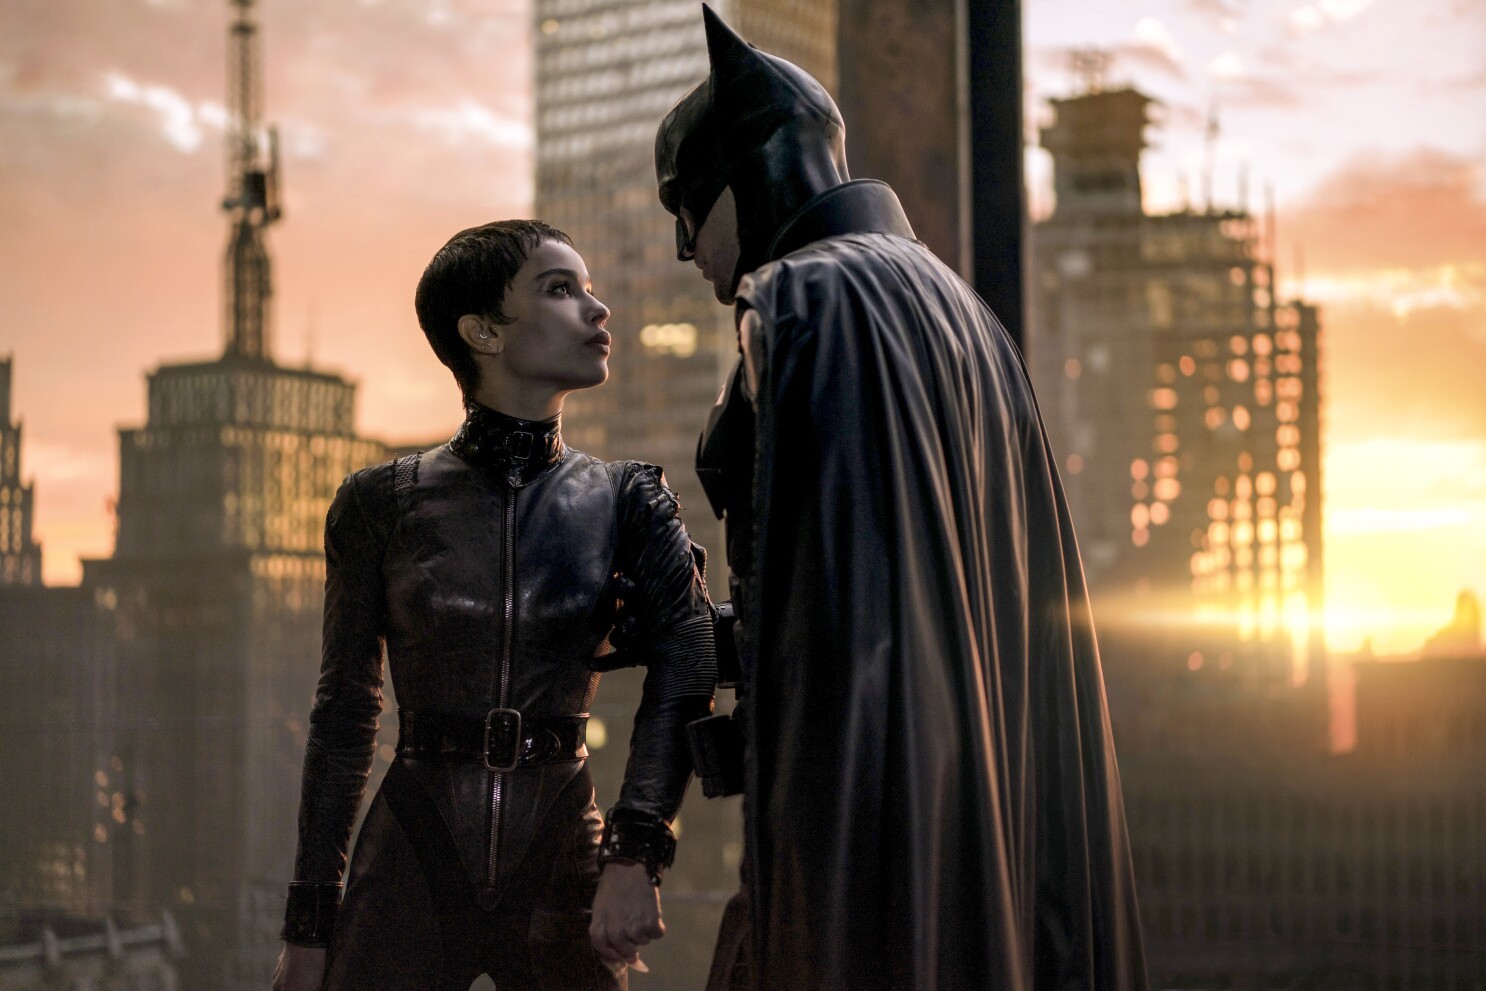 Is 'The Batman' on Disney Plus, HBO Max, Netflix, or Amazon Prime? Here's how you can stream the new movie online for free.